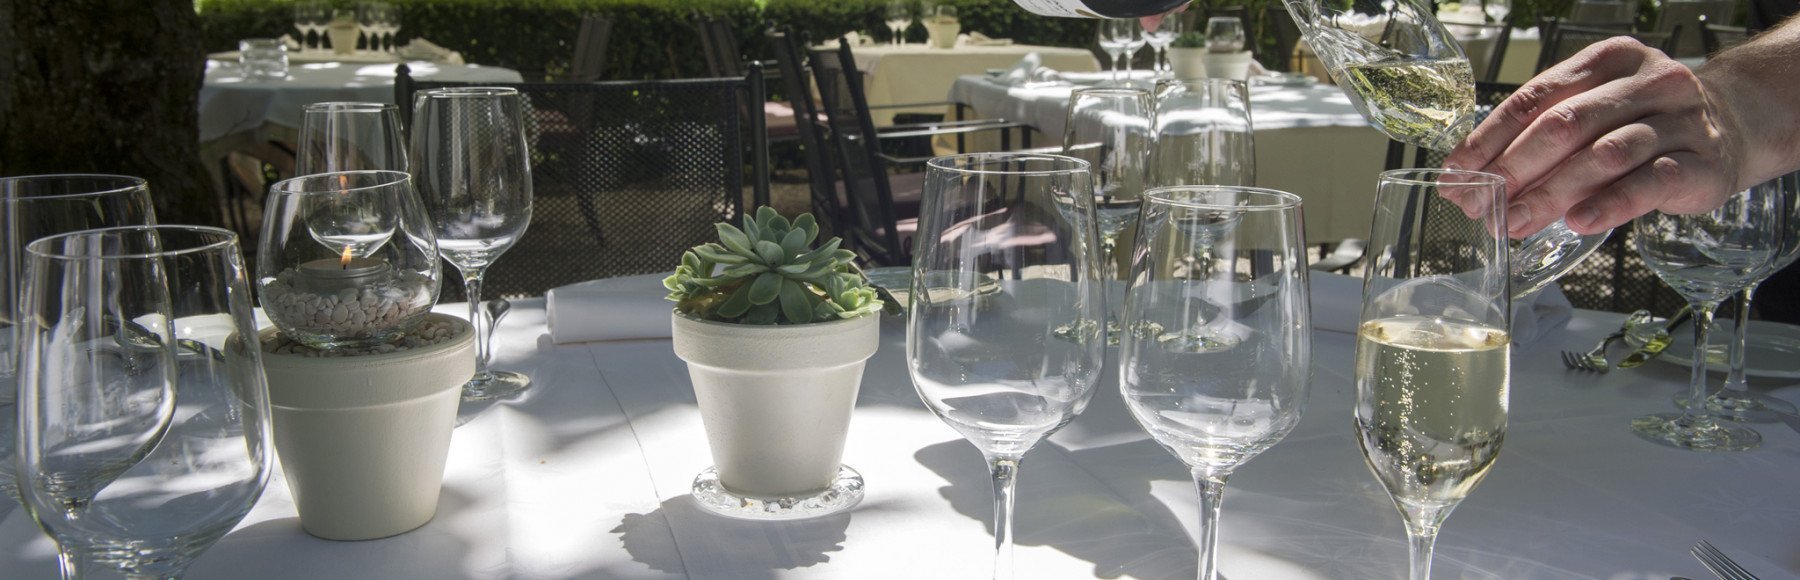 Table in the garden with glasses and sparkling wine